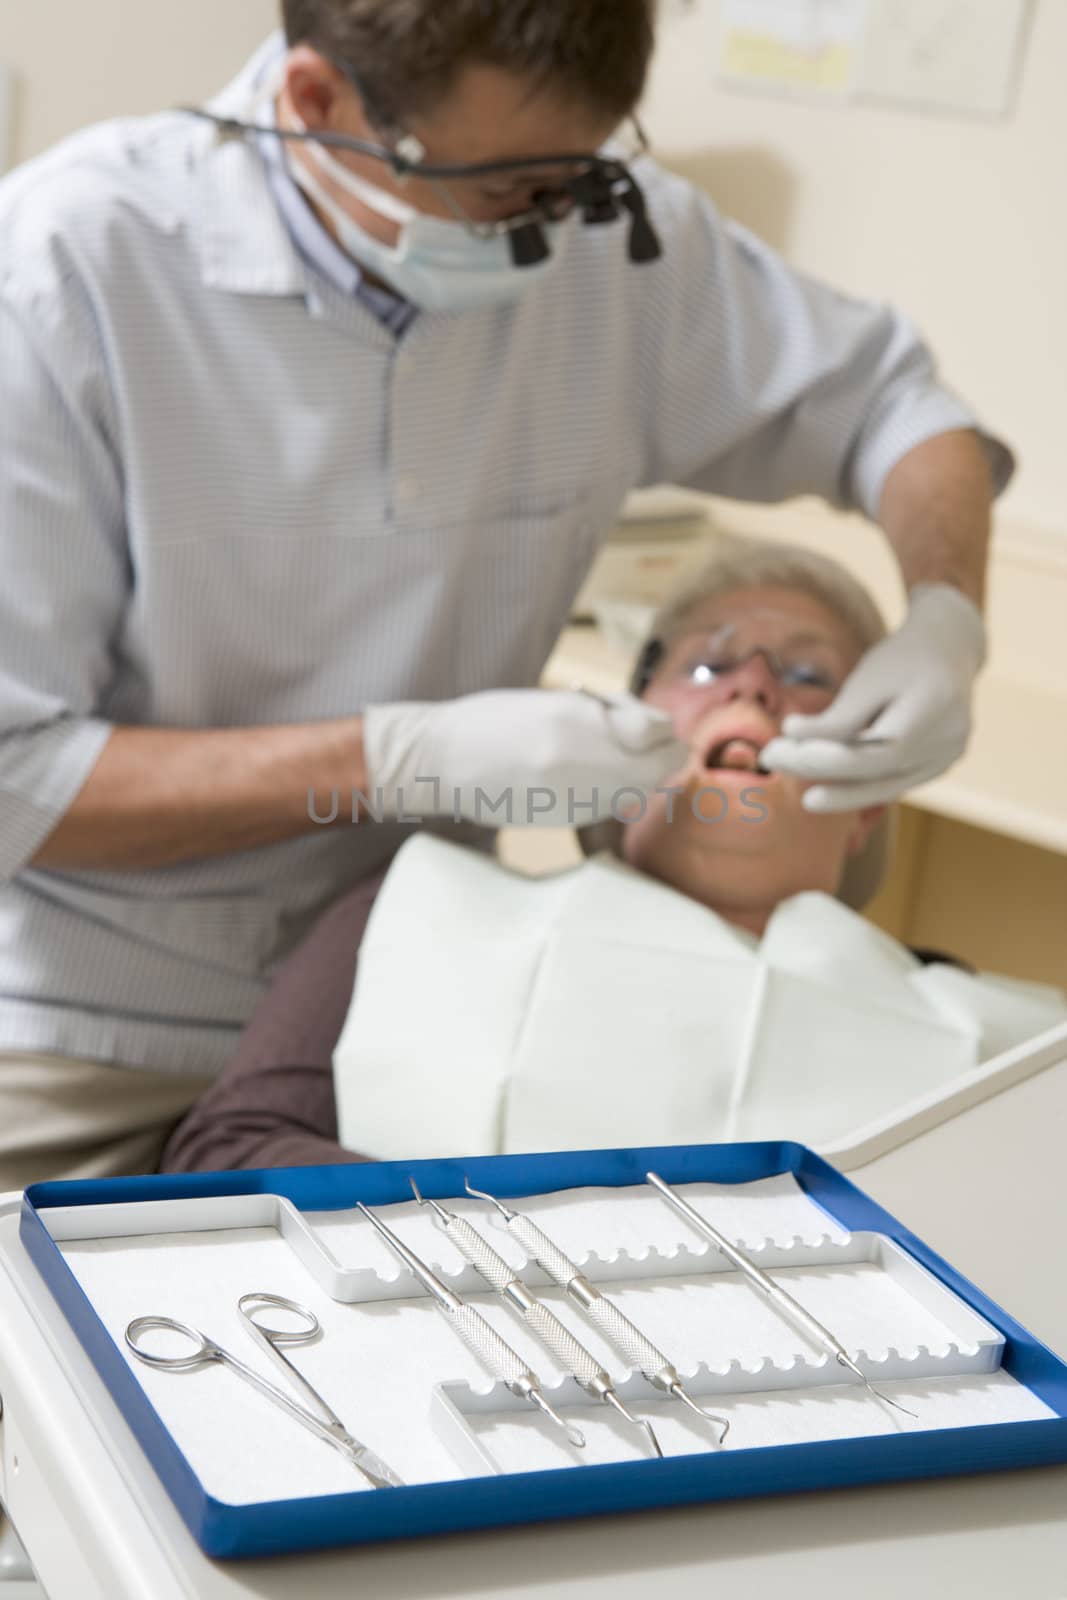 Dentist in exam room with woman in chair by MonkeyBusiness